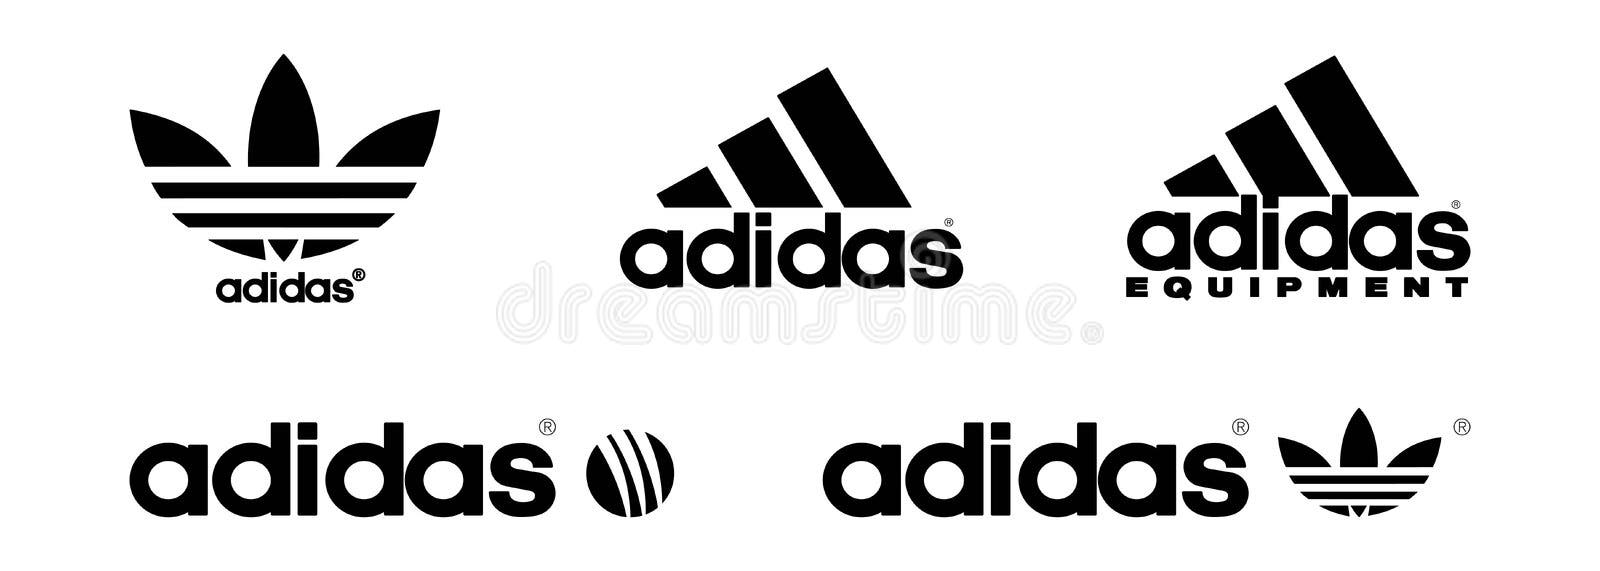 give Rotere Ombord Set of Logos Adidas. Adidas Original. Sportwear Brands. Logos of Sports  Equipment and Sportswear Company. Vector, Icon Editorial Photography -  Illustration of logos, expensive: 222305552